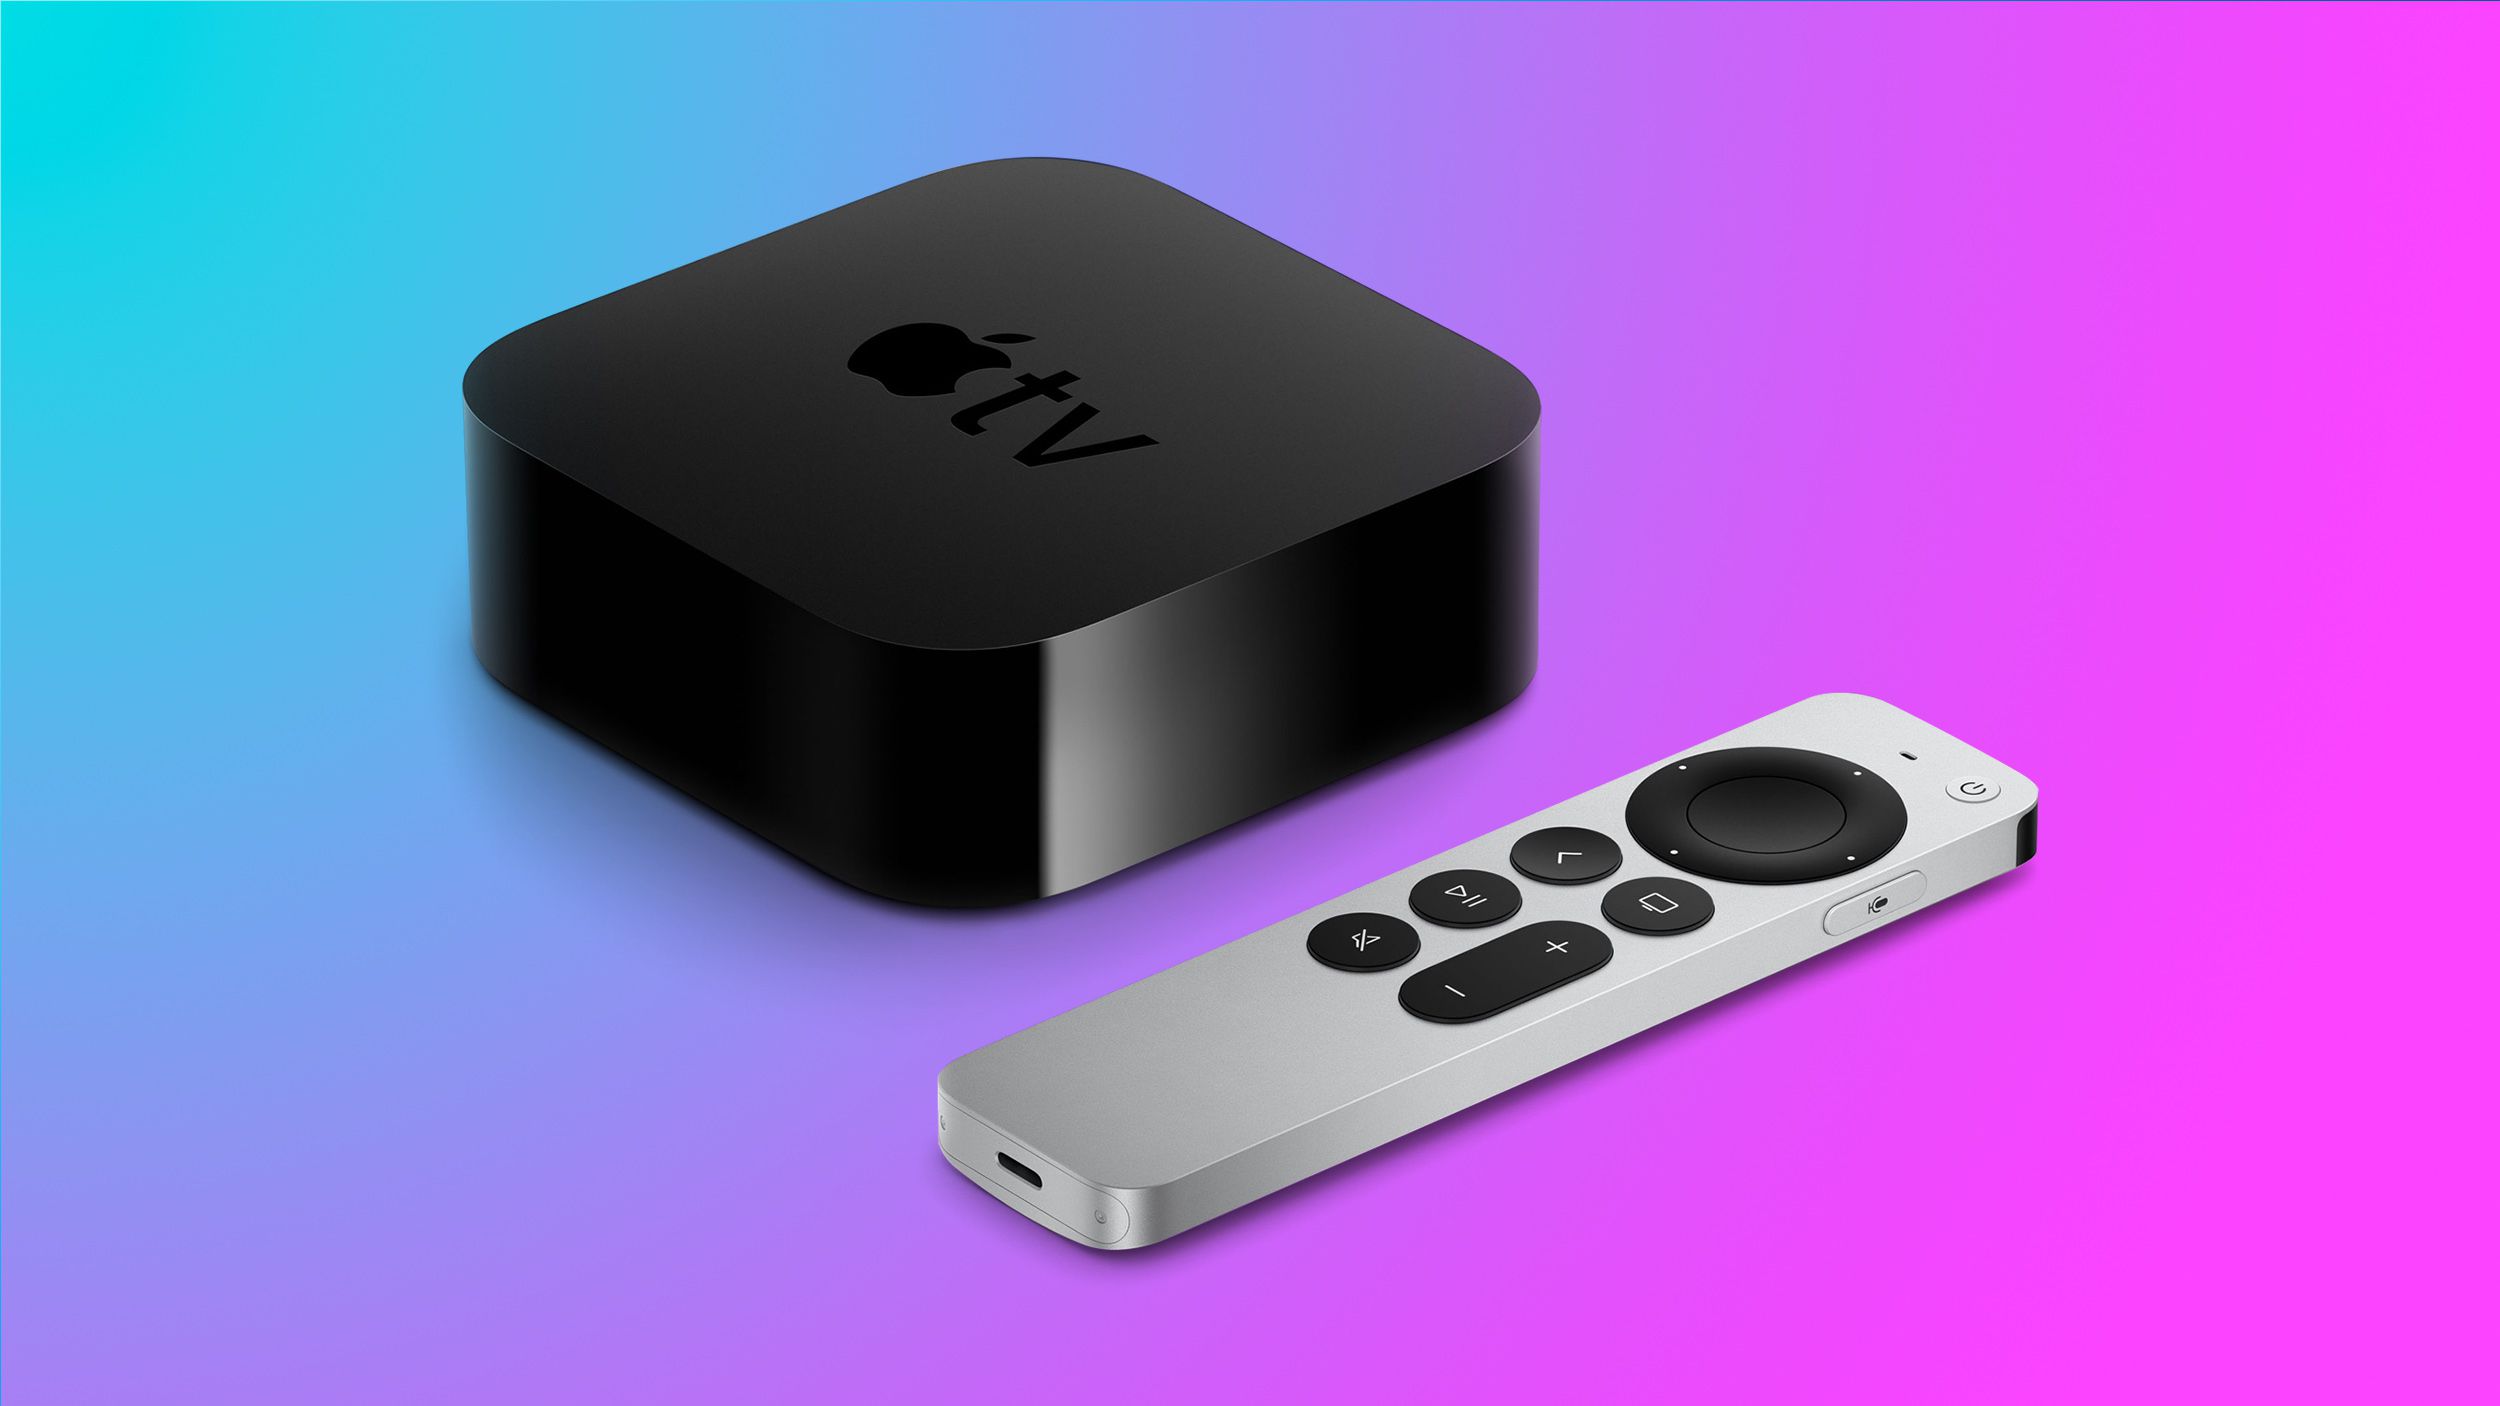 kompakt notifikation skruenøgle Kuo: New Apple TV to Launch in Second Half of 2022, Lower Price Possible -  MacRumors